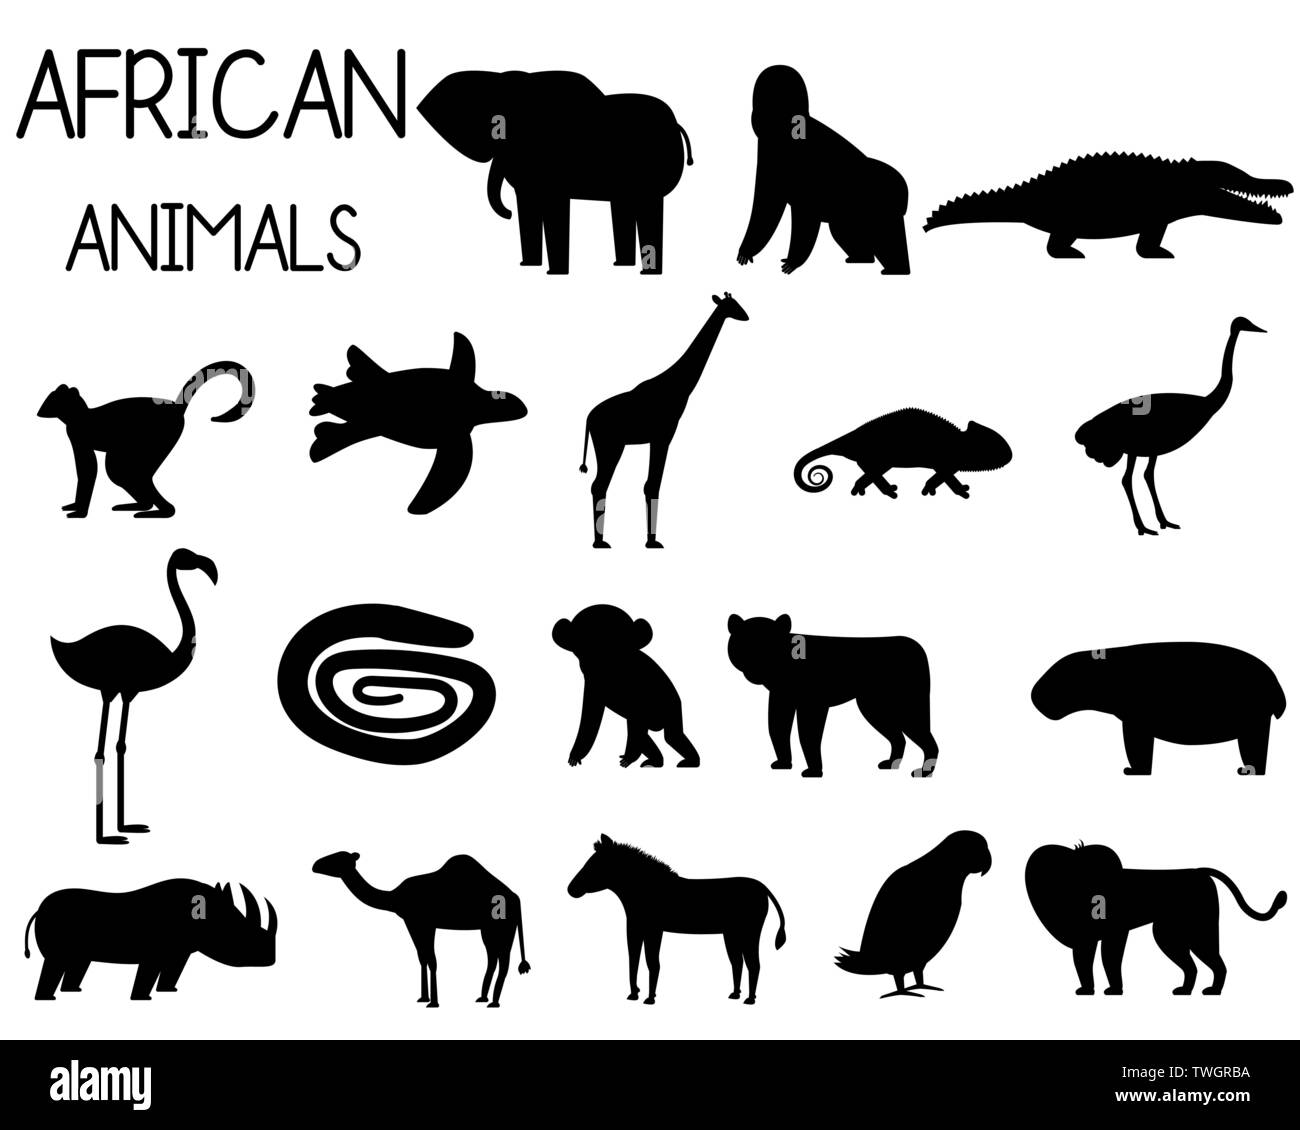 African animal silhouettes set of icons in flat style, African fauna, elephant, rhino, lion, parrot, etc. vector illustration Stock Vector